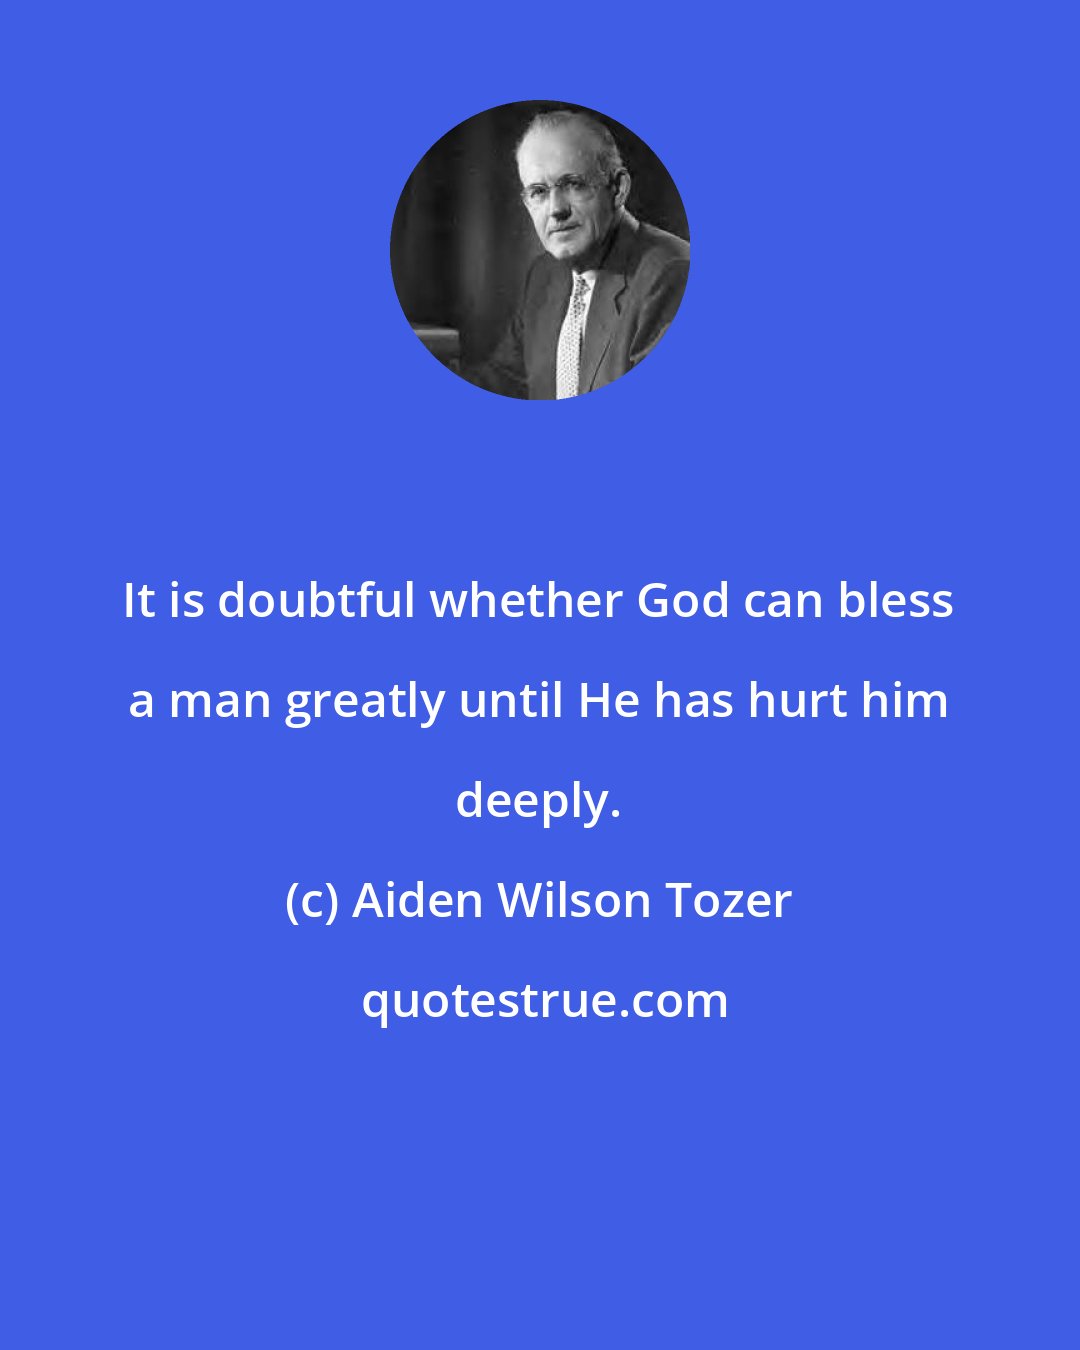 Aiden Wilson Tozer: It is doubtful whether God can bless a man greatly until He has hurt him deeply.